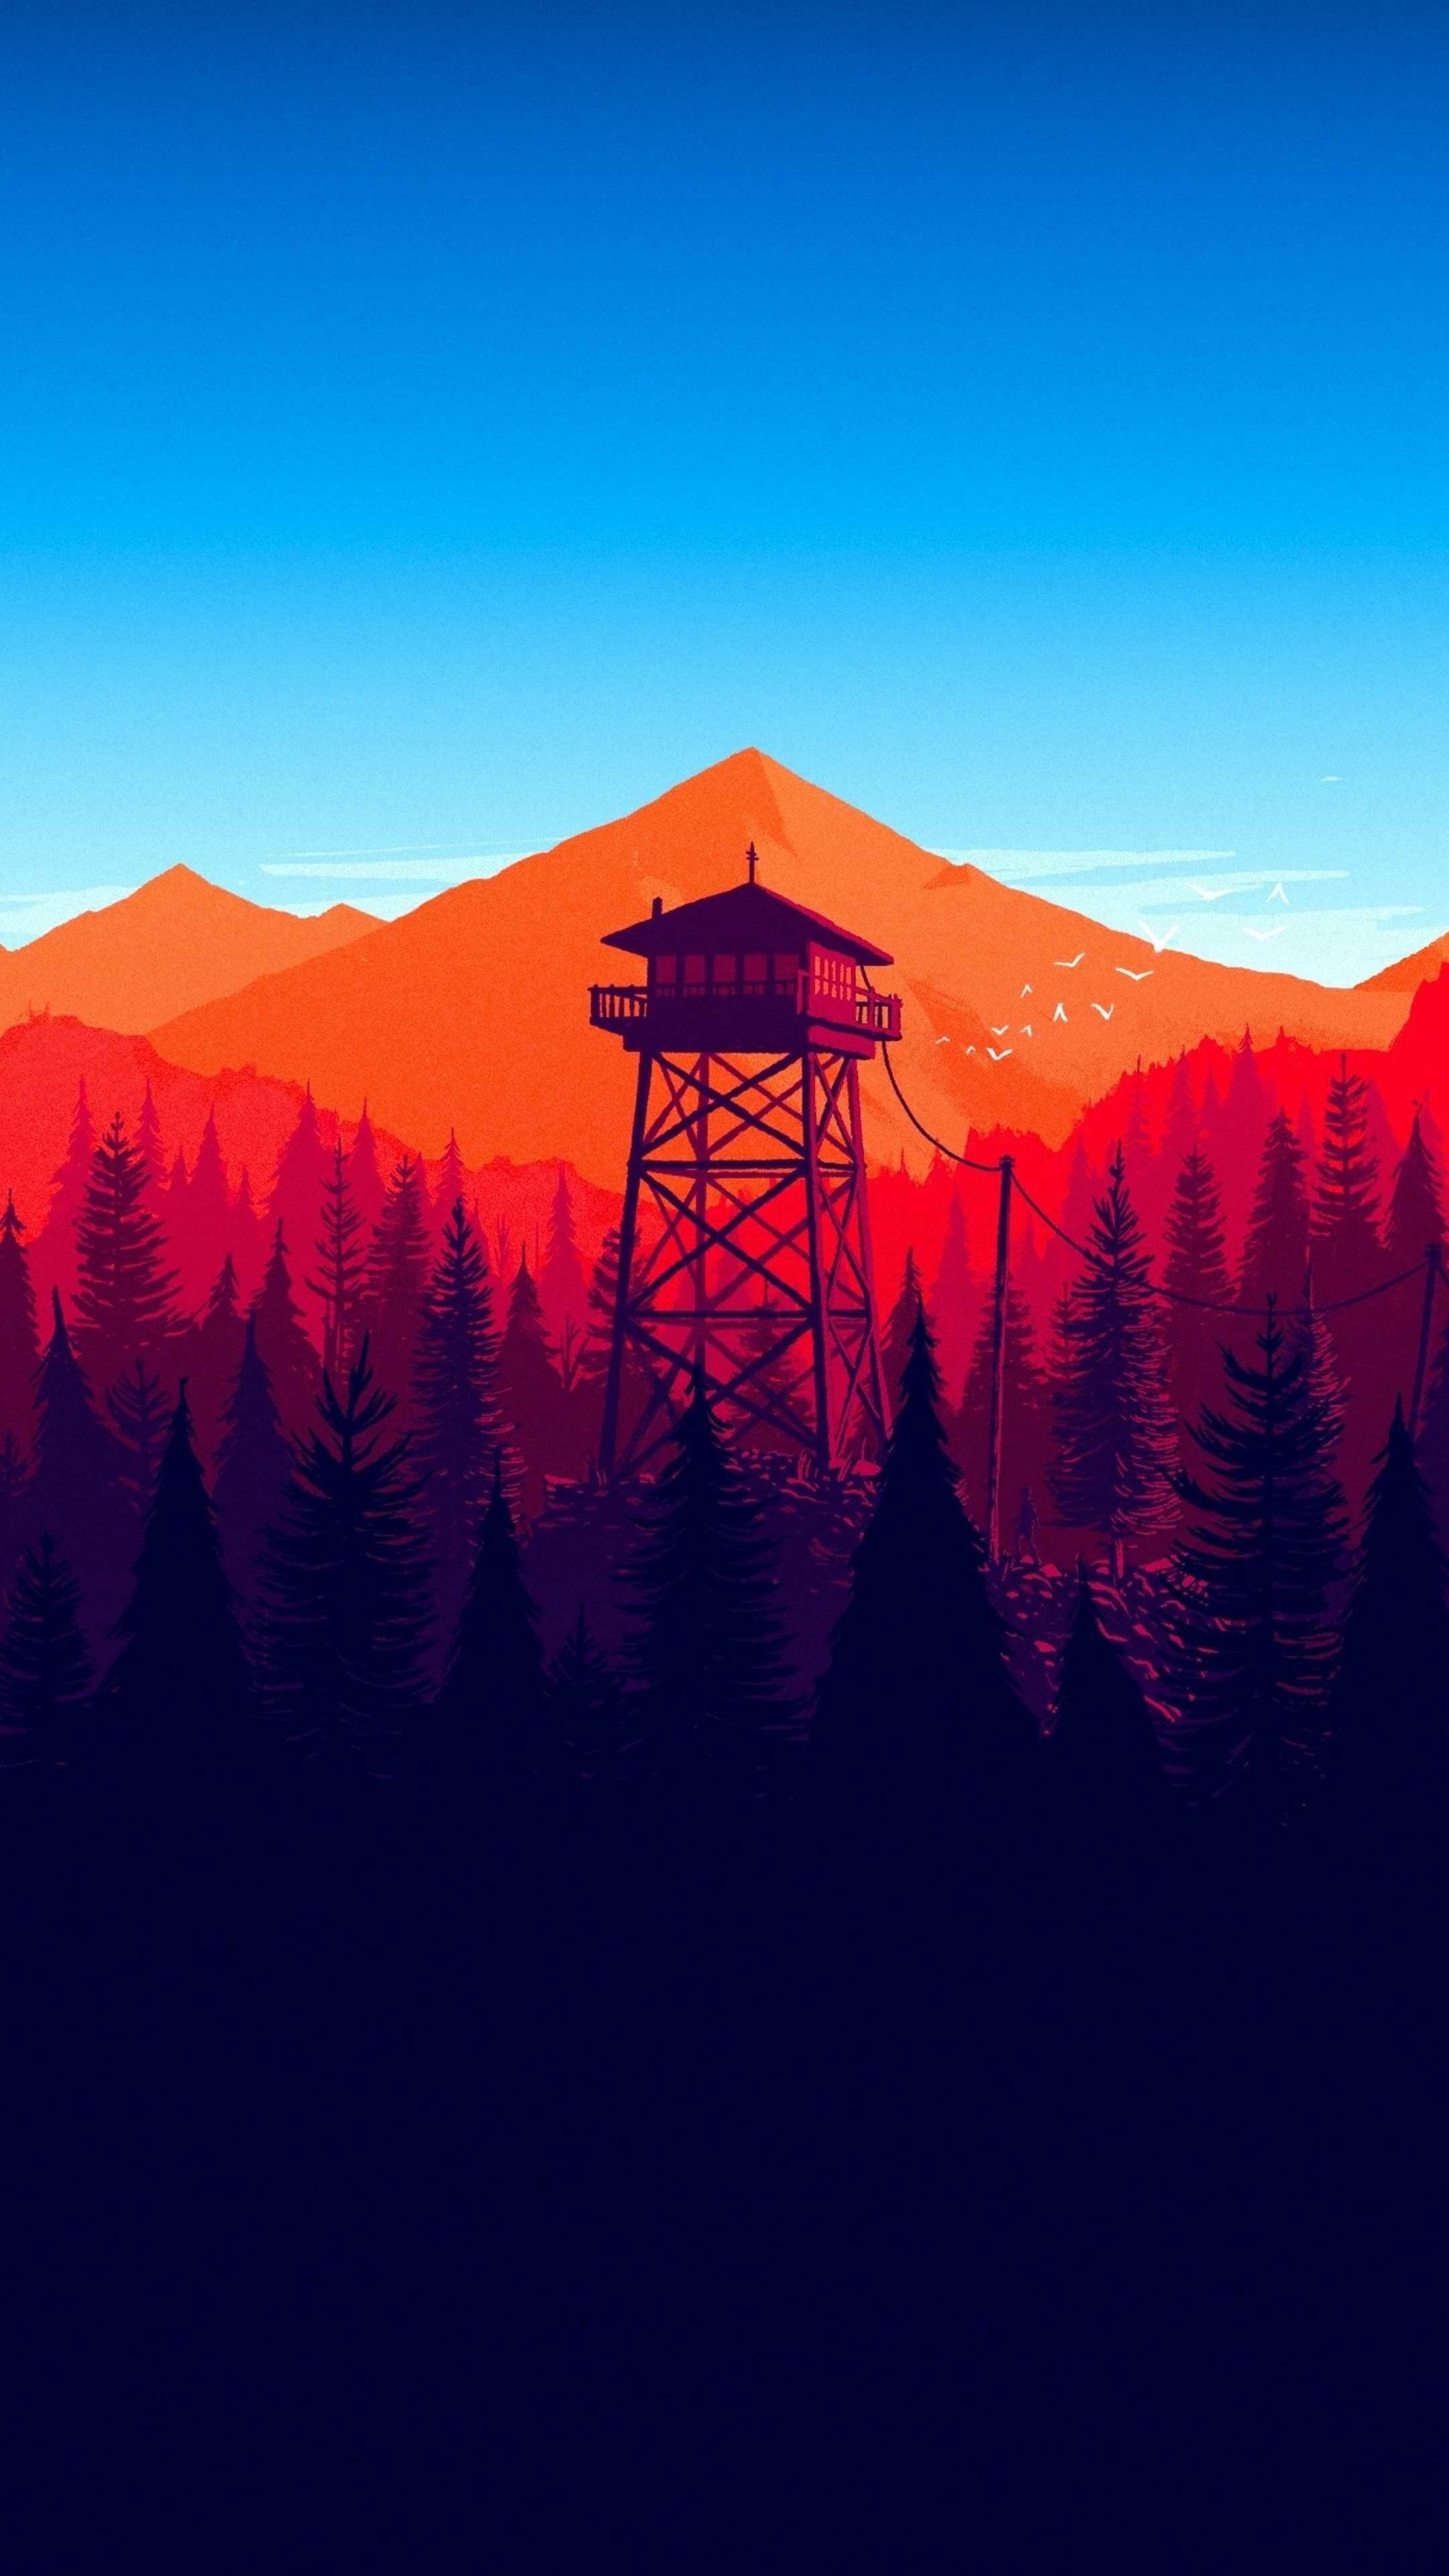 Firewatch: The game received generally positive reviews, earning praise for its story, characters, dialogue, and visual style. 2160x3840 4K Background.